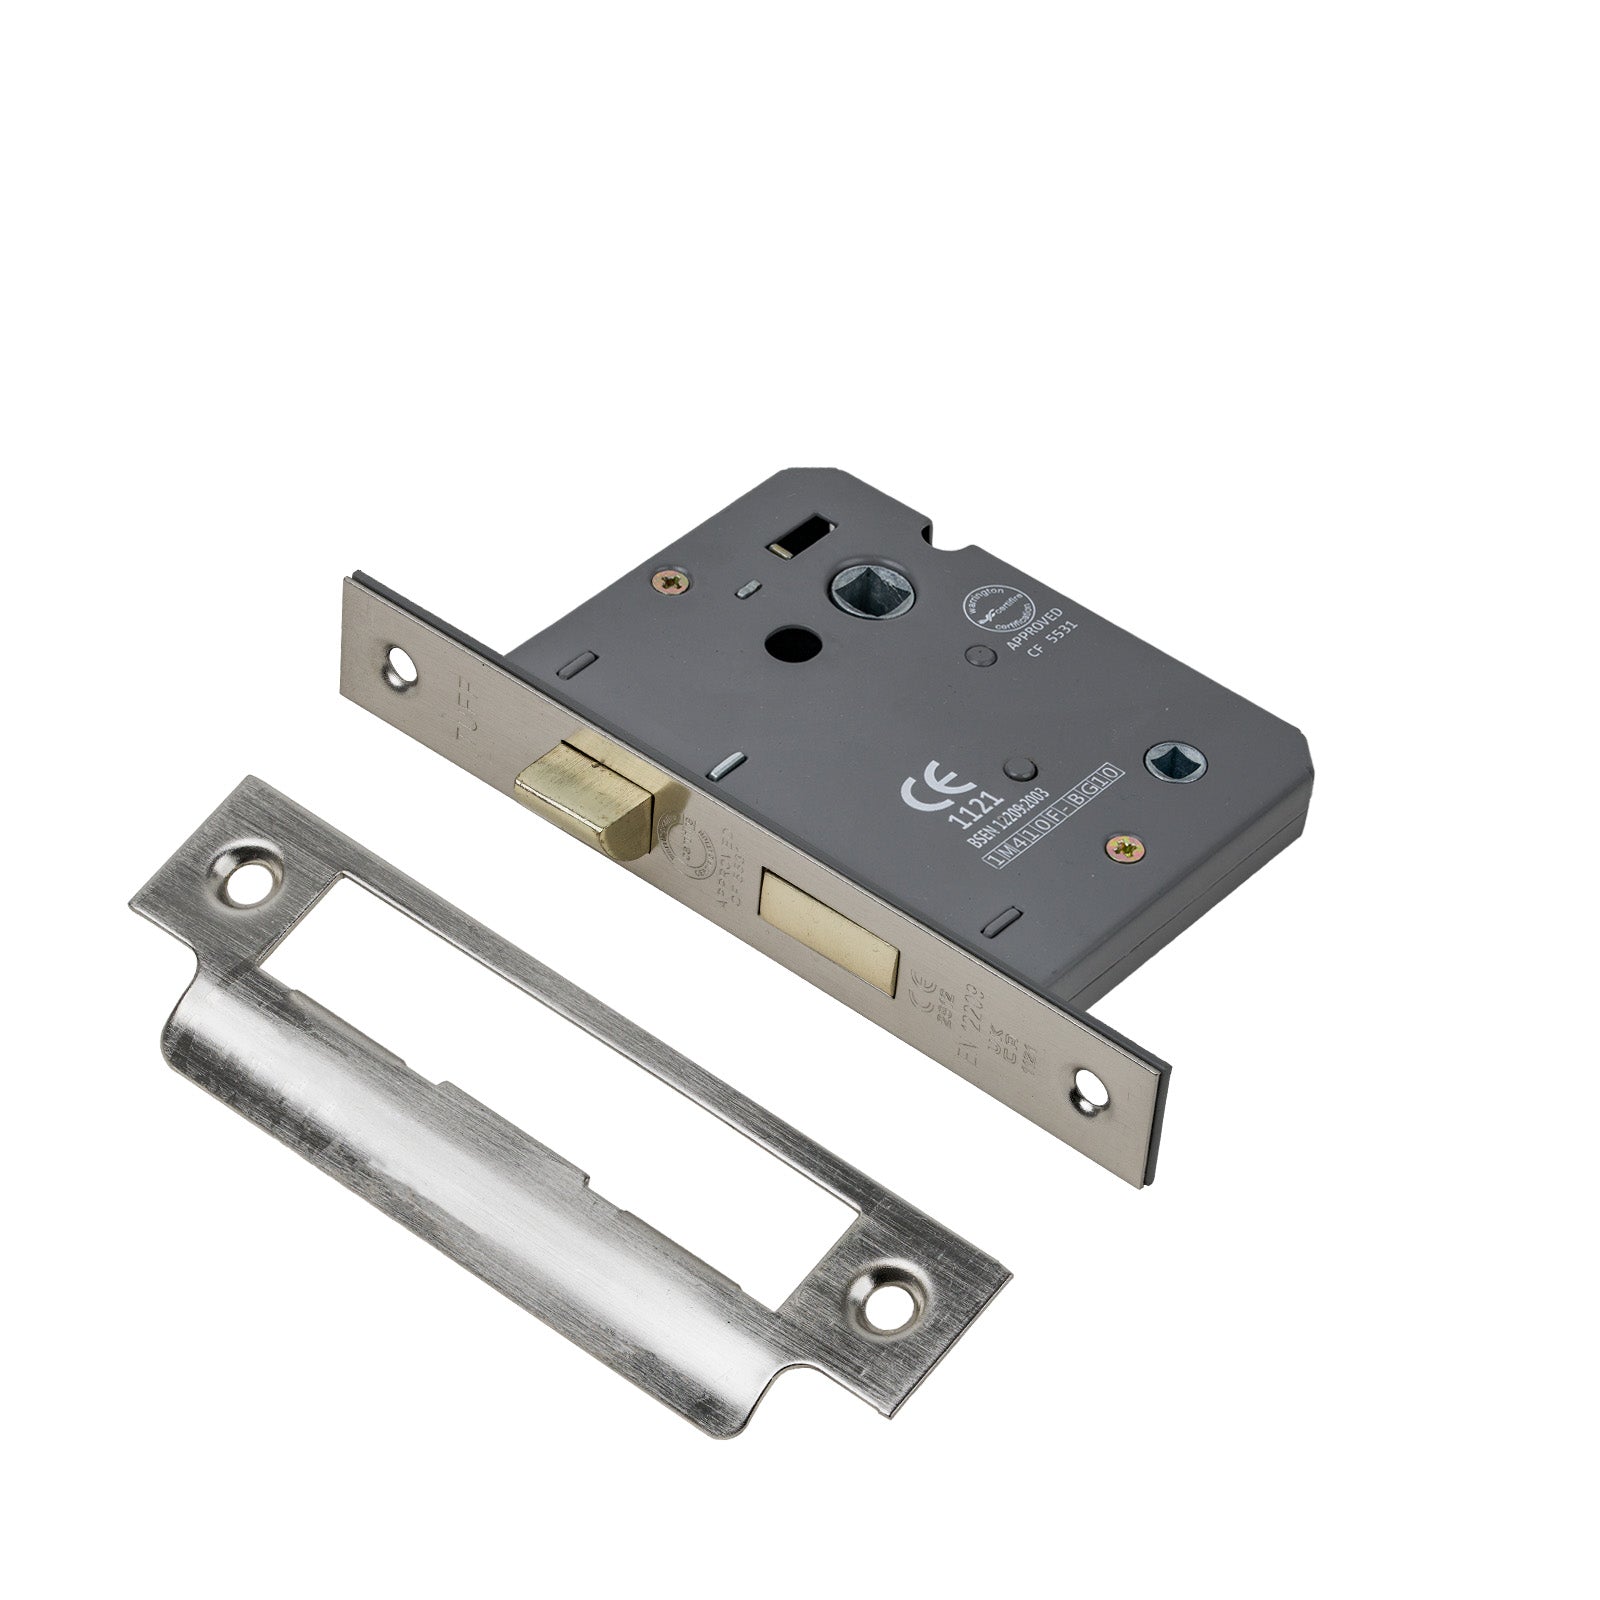 SHOW Bathroom Sash Lock - 3 Inch with Nickel finished forend and striker plate